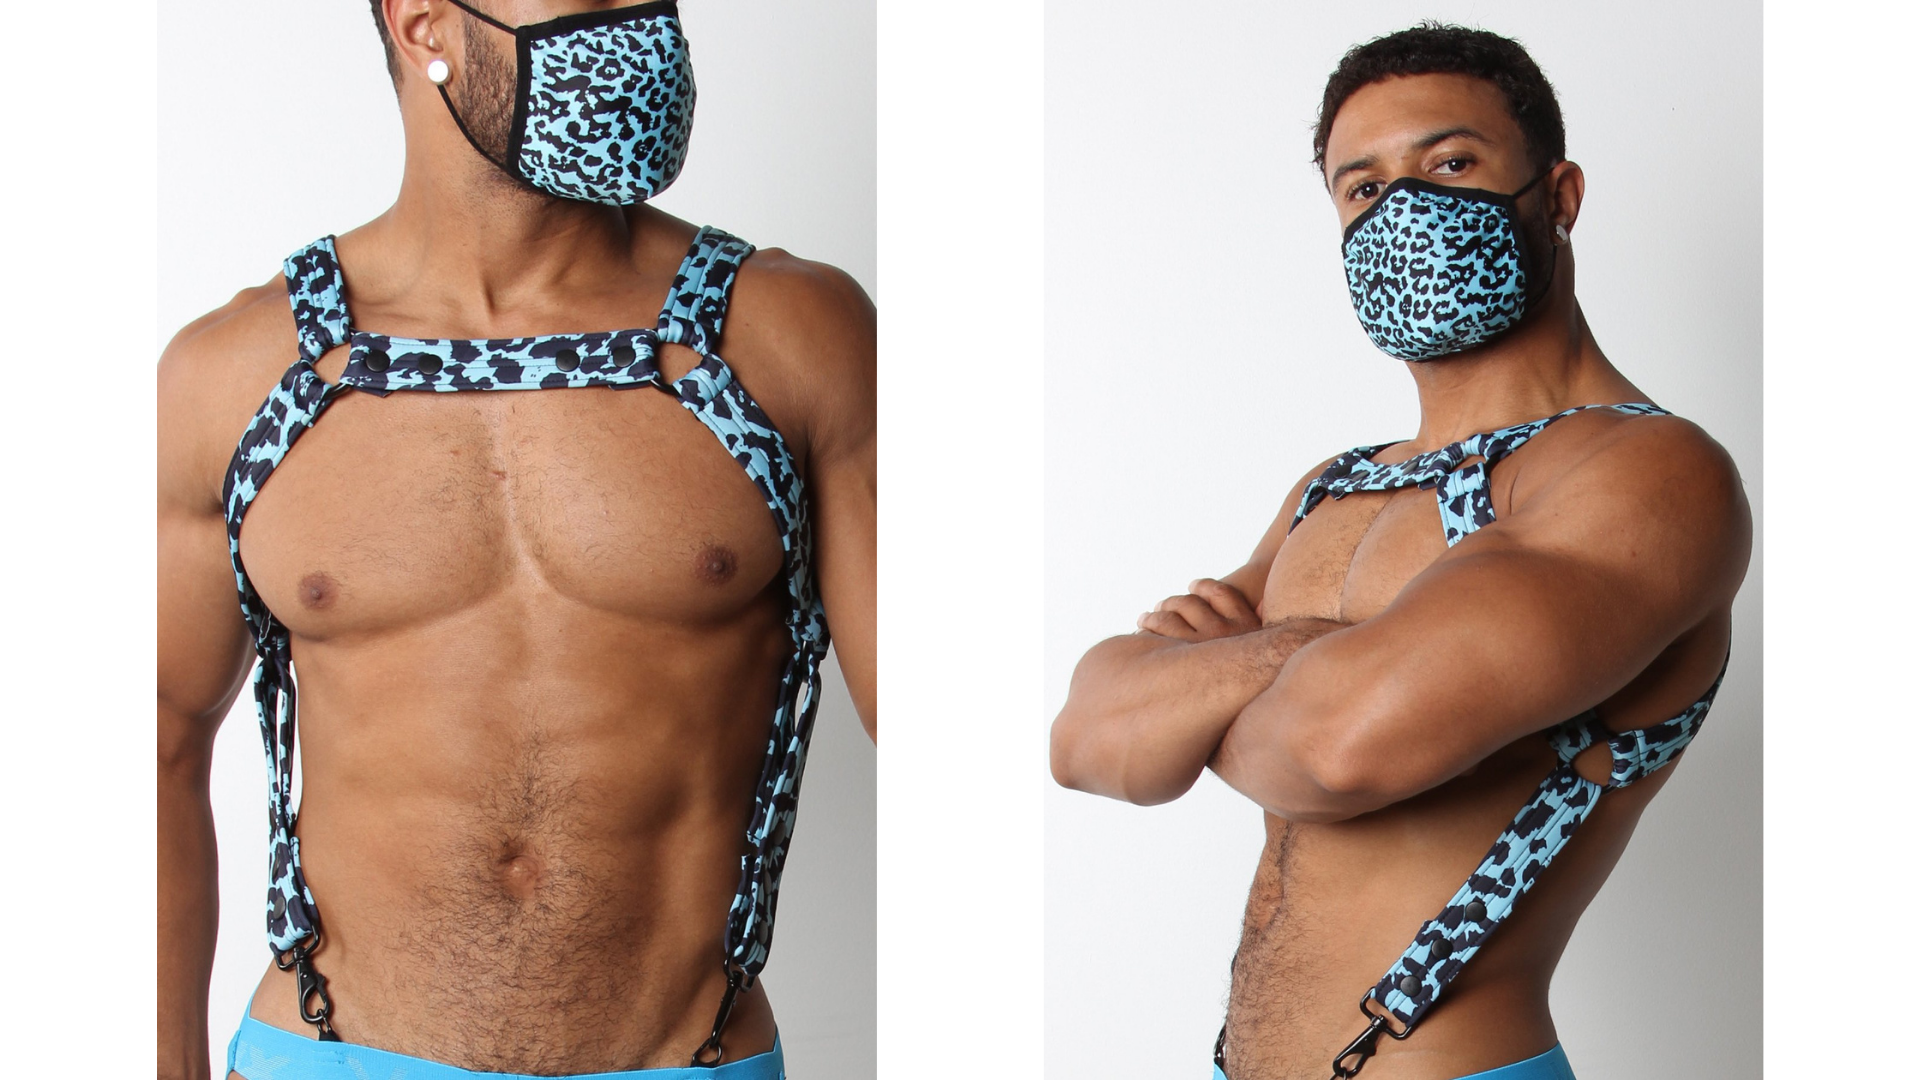 How the Harness Went from BDSM to Streetwear